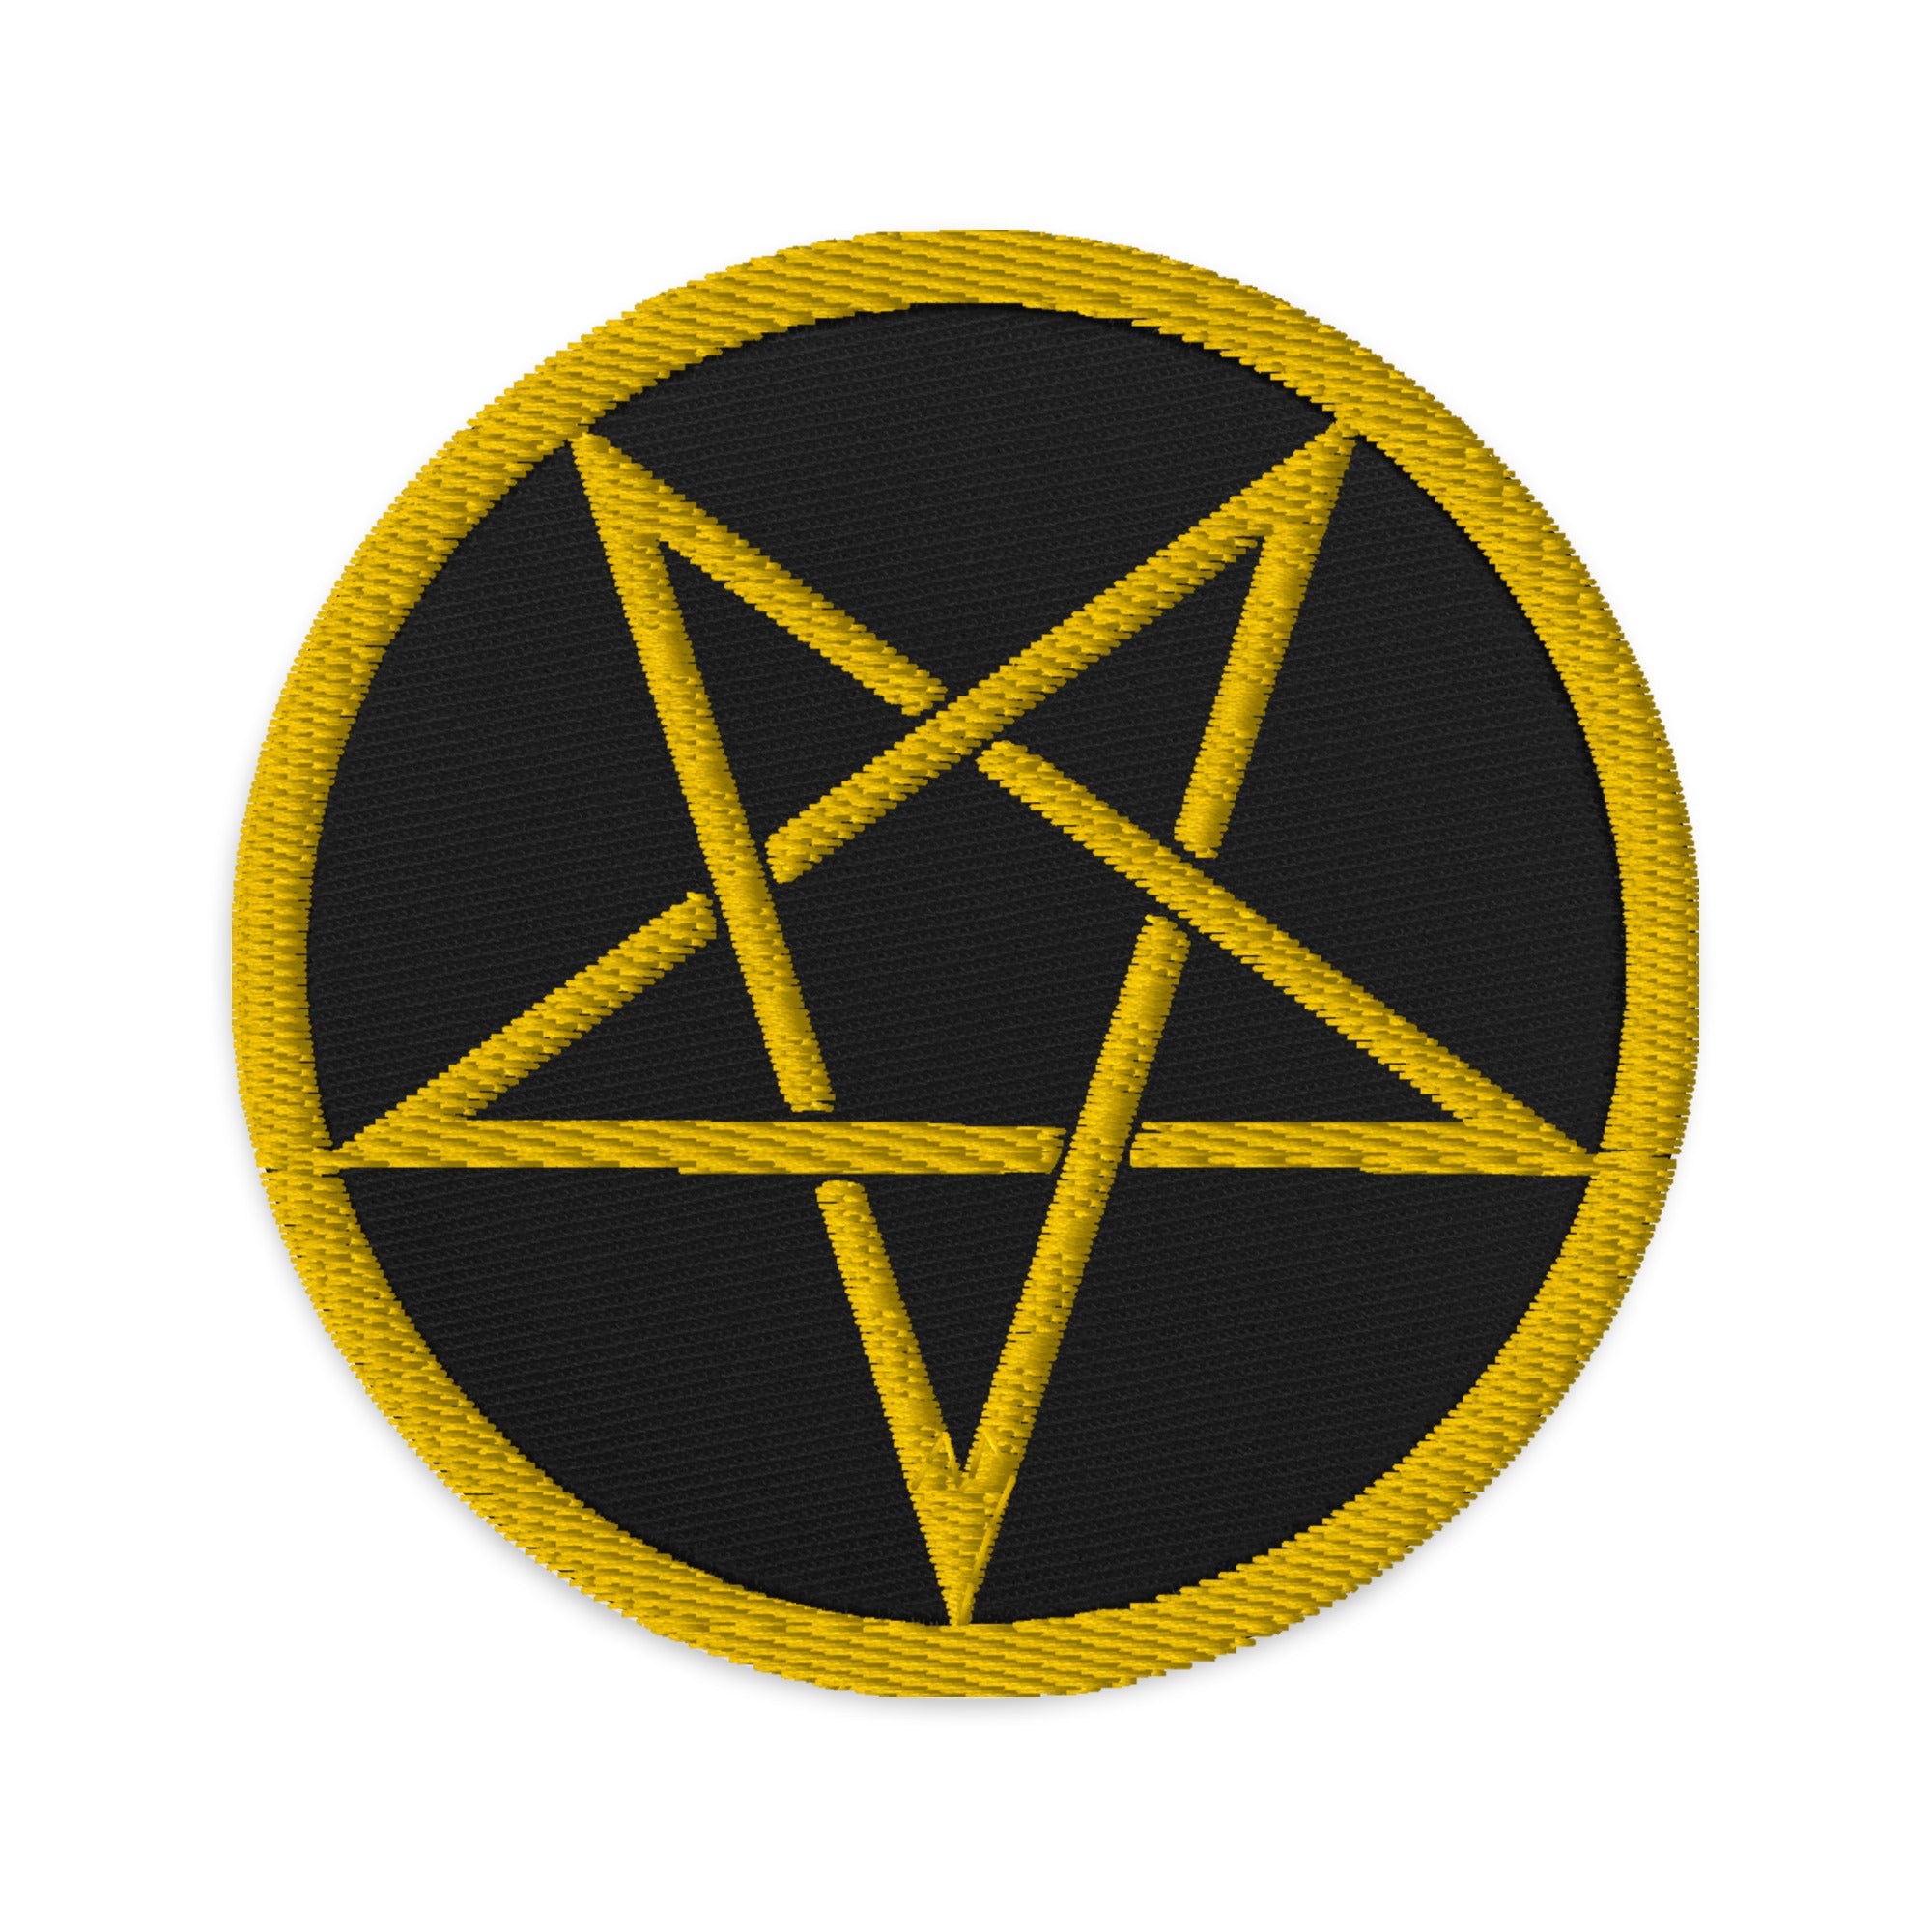 Woven Inverted Pentagram Symbol Embroidered Patch Satanic Temple - Edge of Life Designs